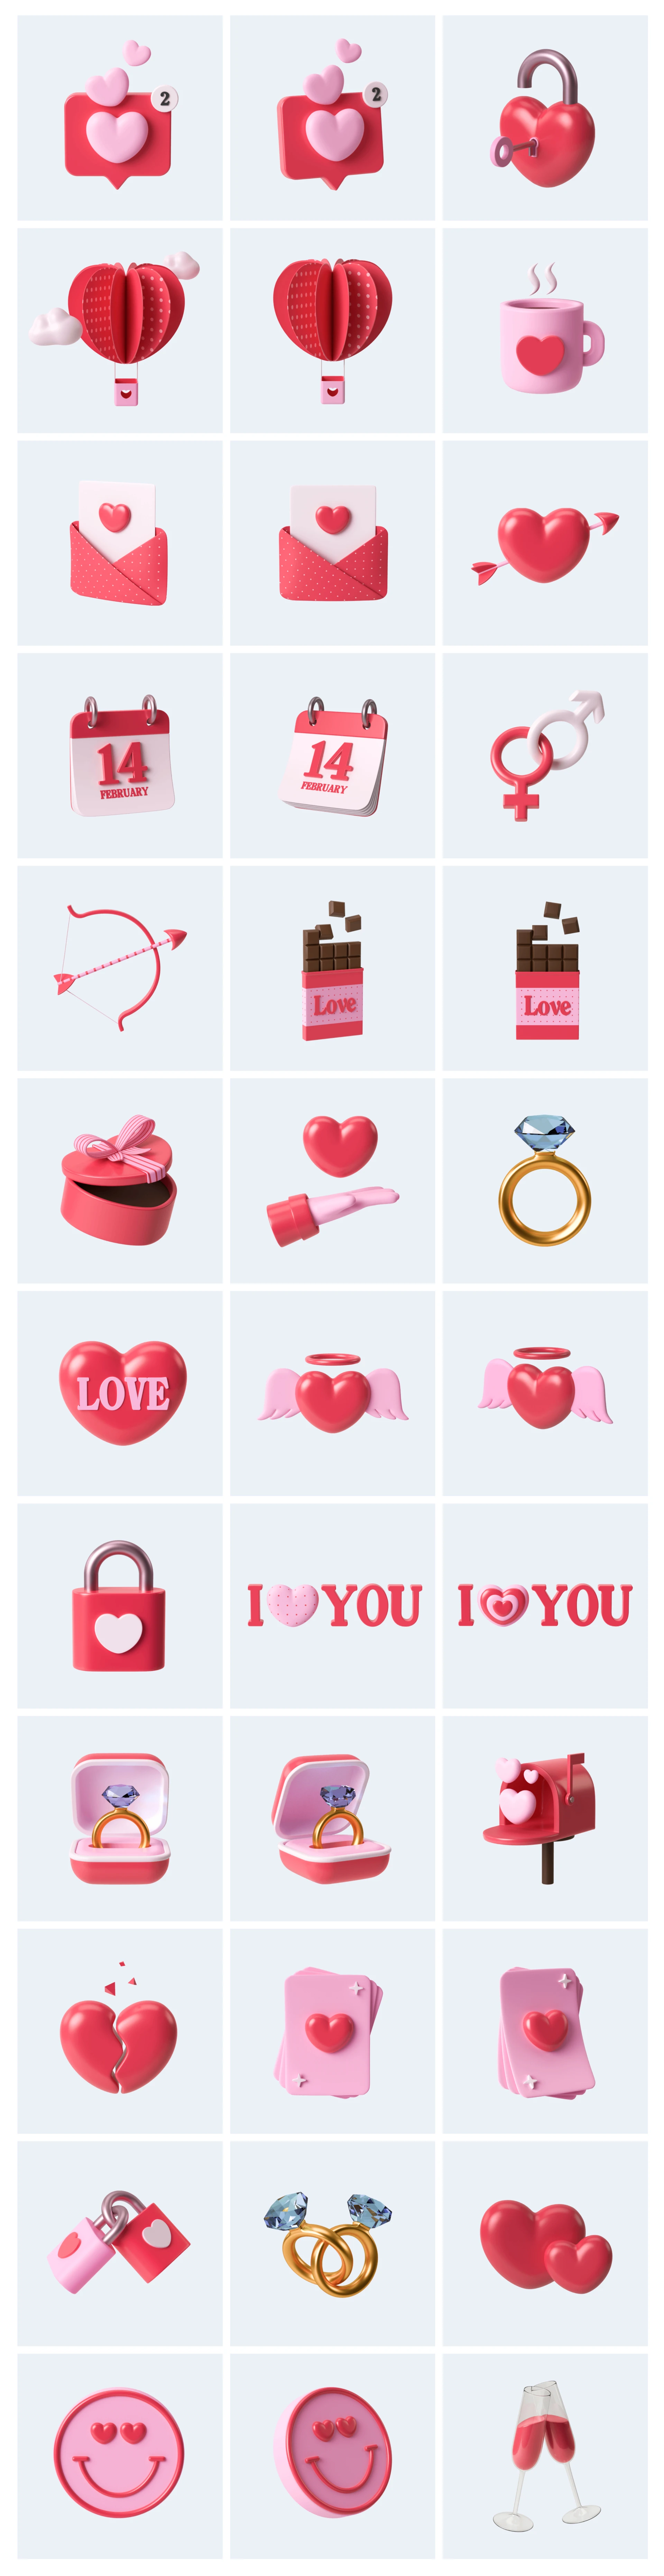 Valentine's Day 3D Free Illustrations for Figma - Create amazing Valentine’s Day designs with this beautiful set of illustrations. Heart with wings, chocolate bars, cute letters and much more. Bring smile and joy to your users. Made with love and care. 100% freeeeee!